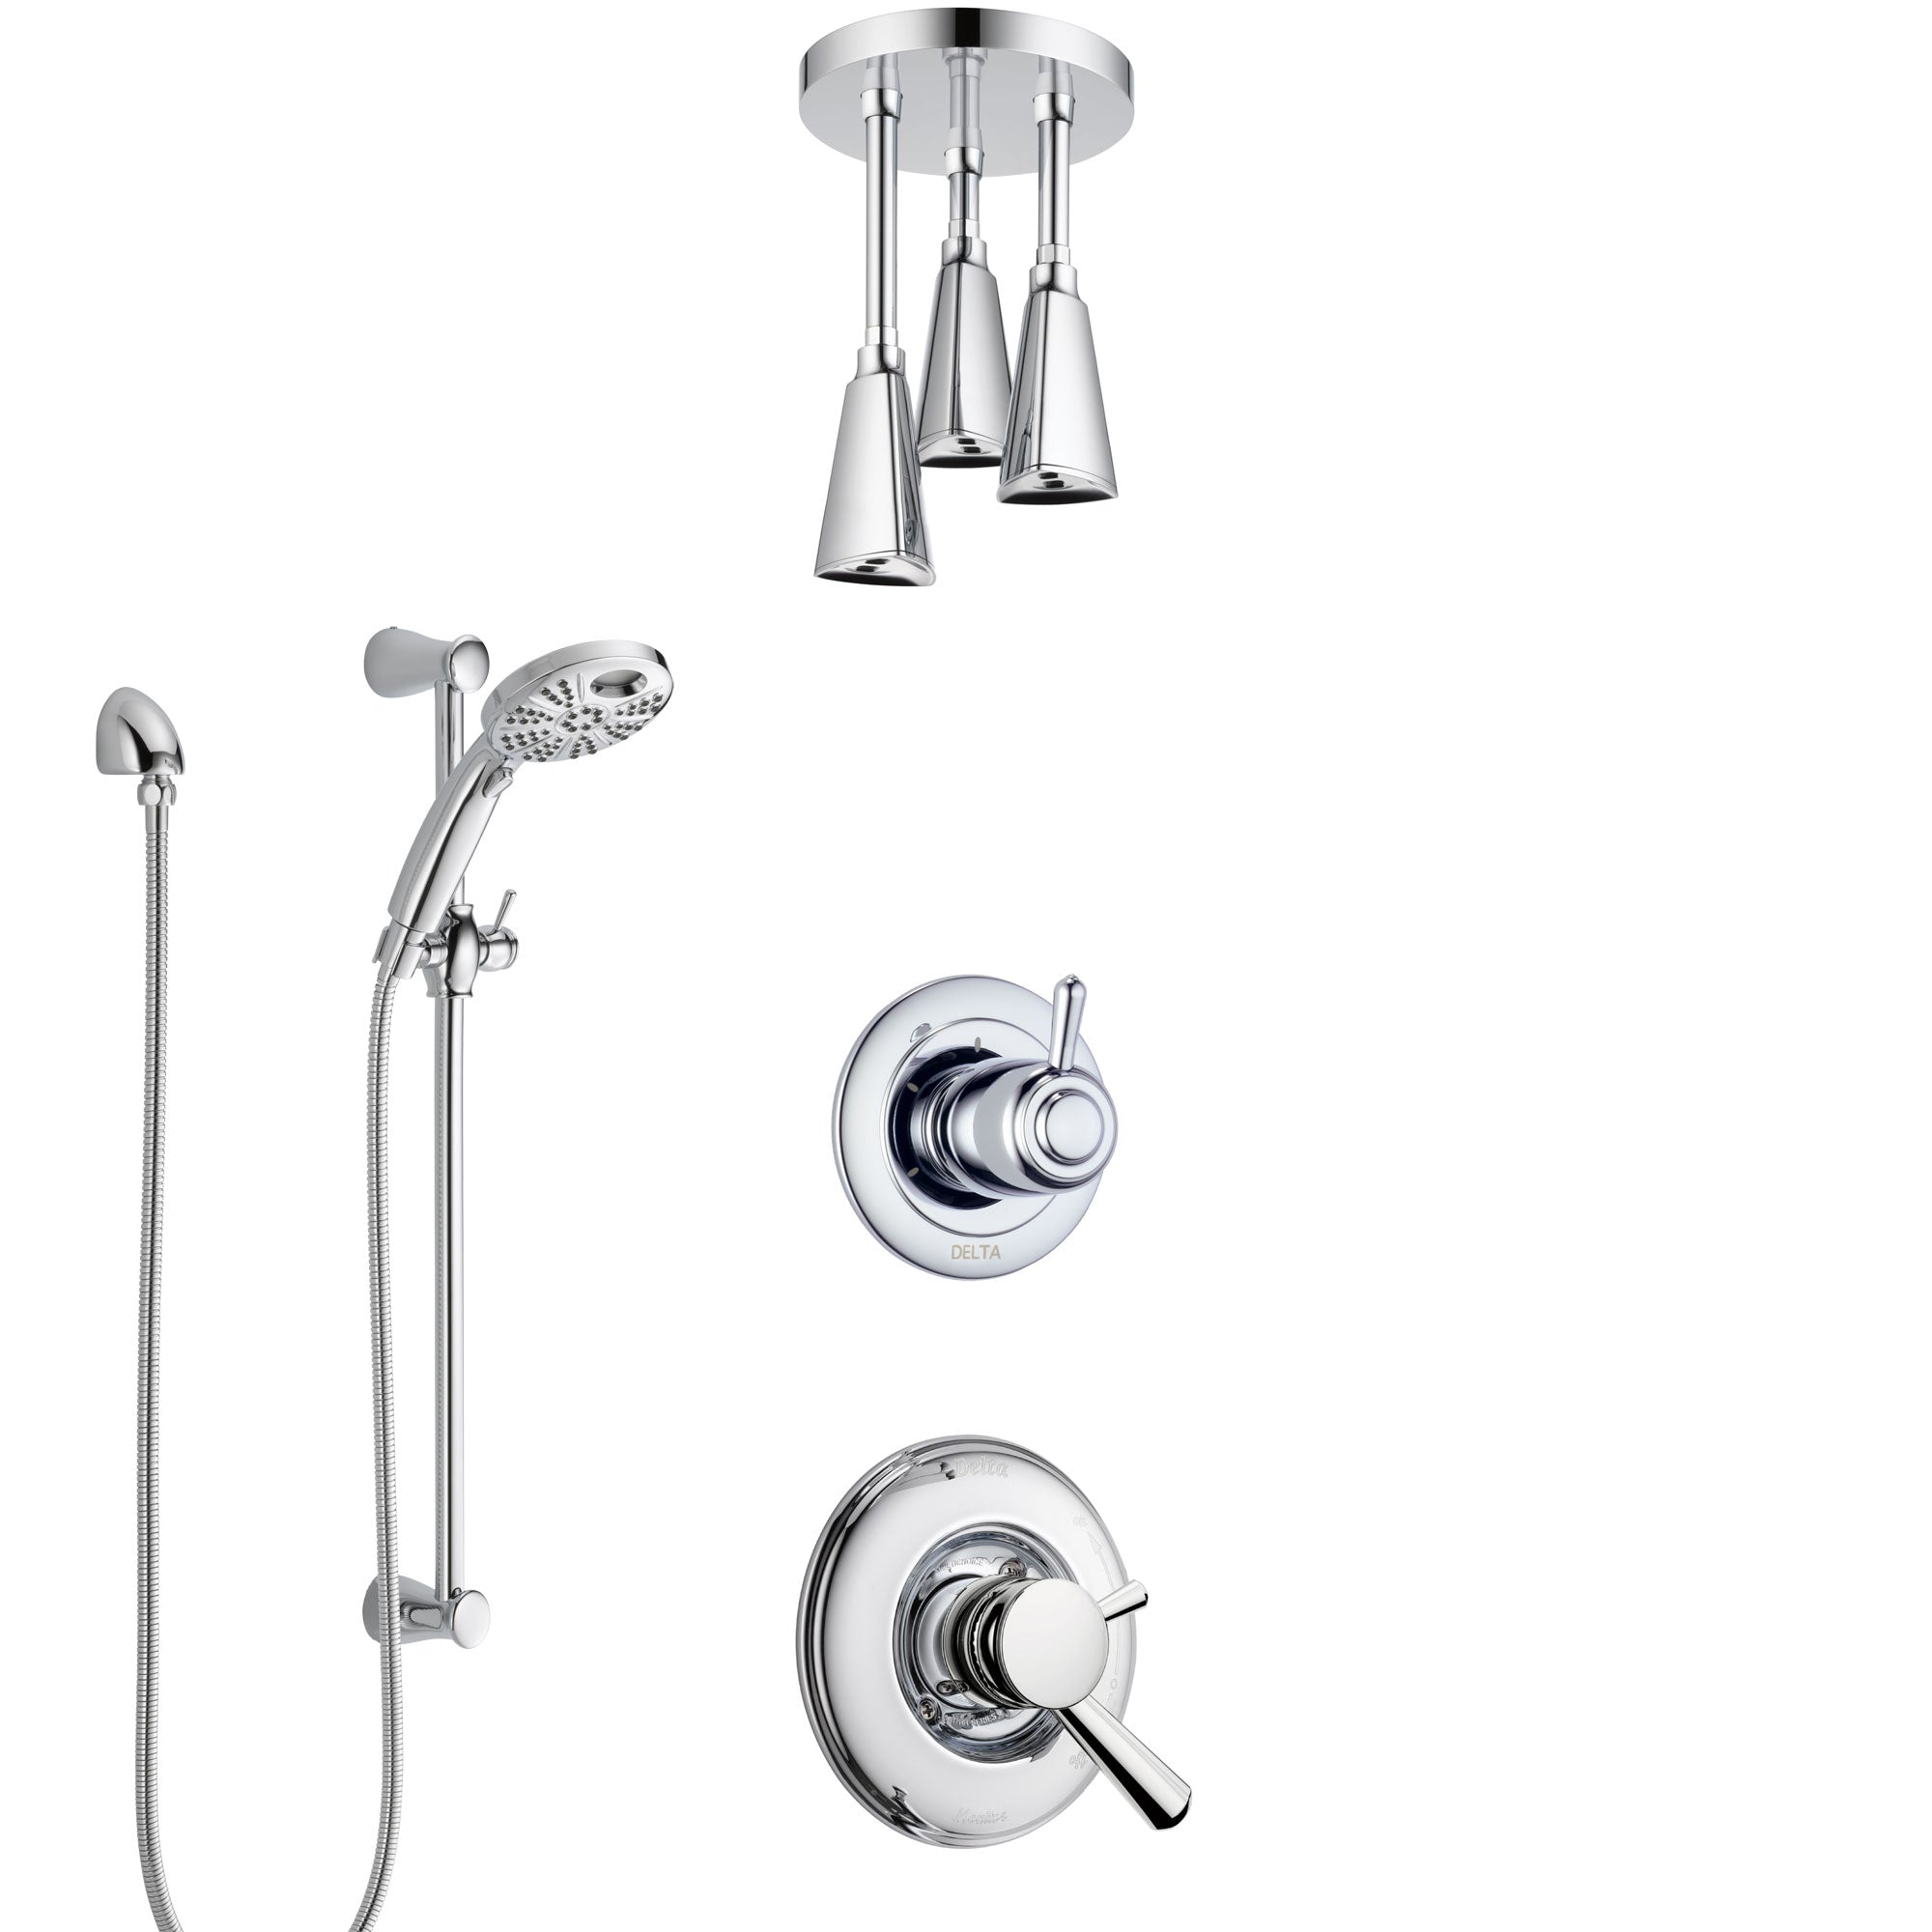 Delta Linden Chrome Finish Shower System with Dual Control, 3-Setting Diverter, Ceiling Mount Showerhead, and Temp2O Hand Shower with Slidebar SS17938